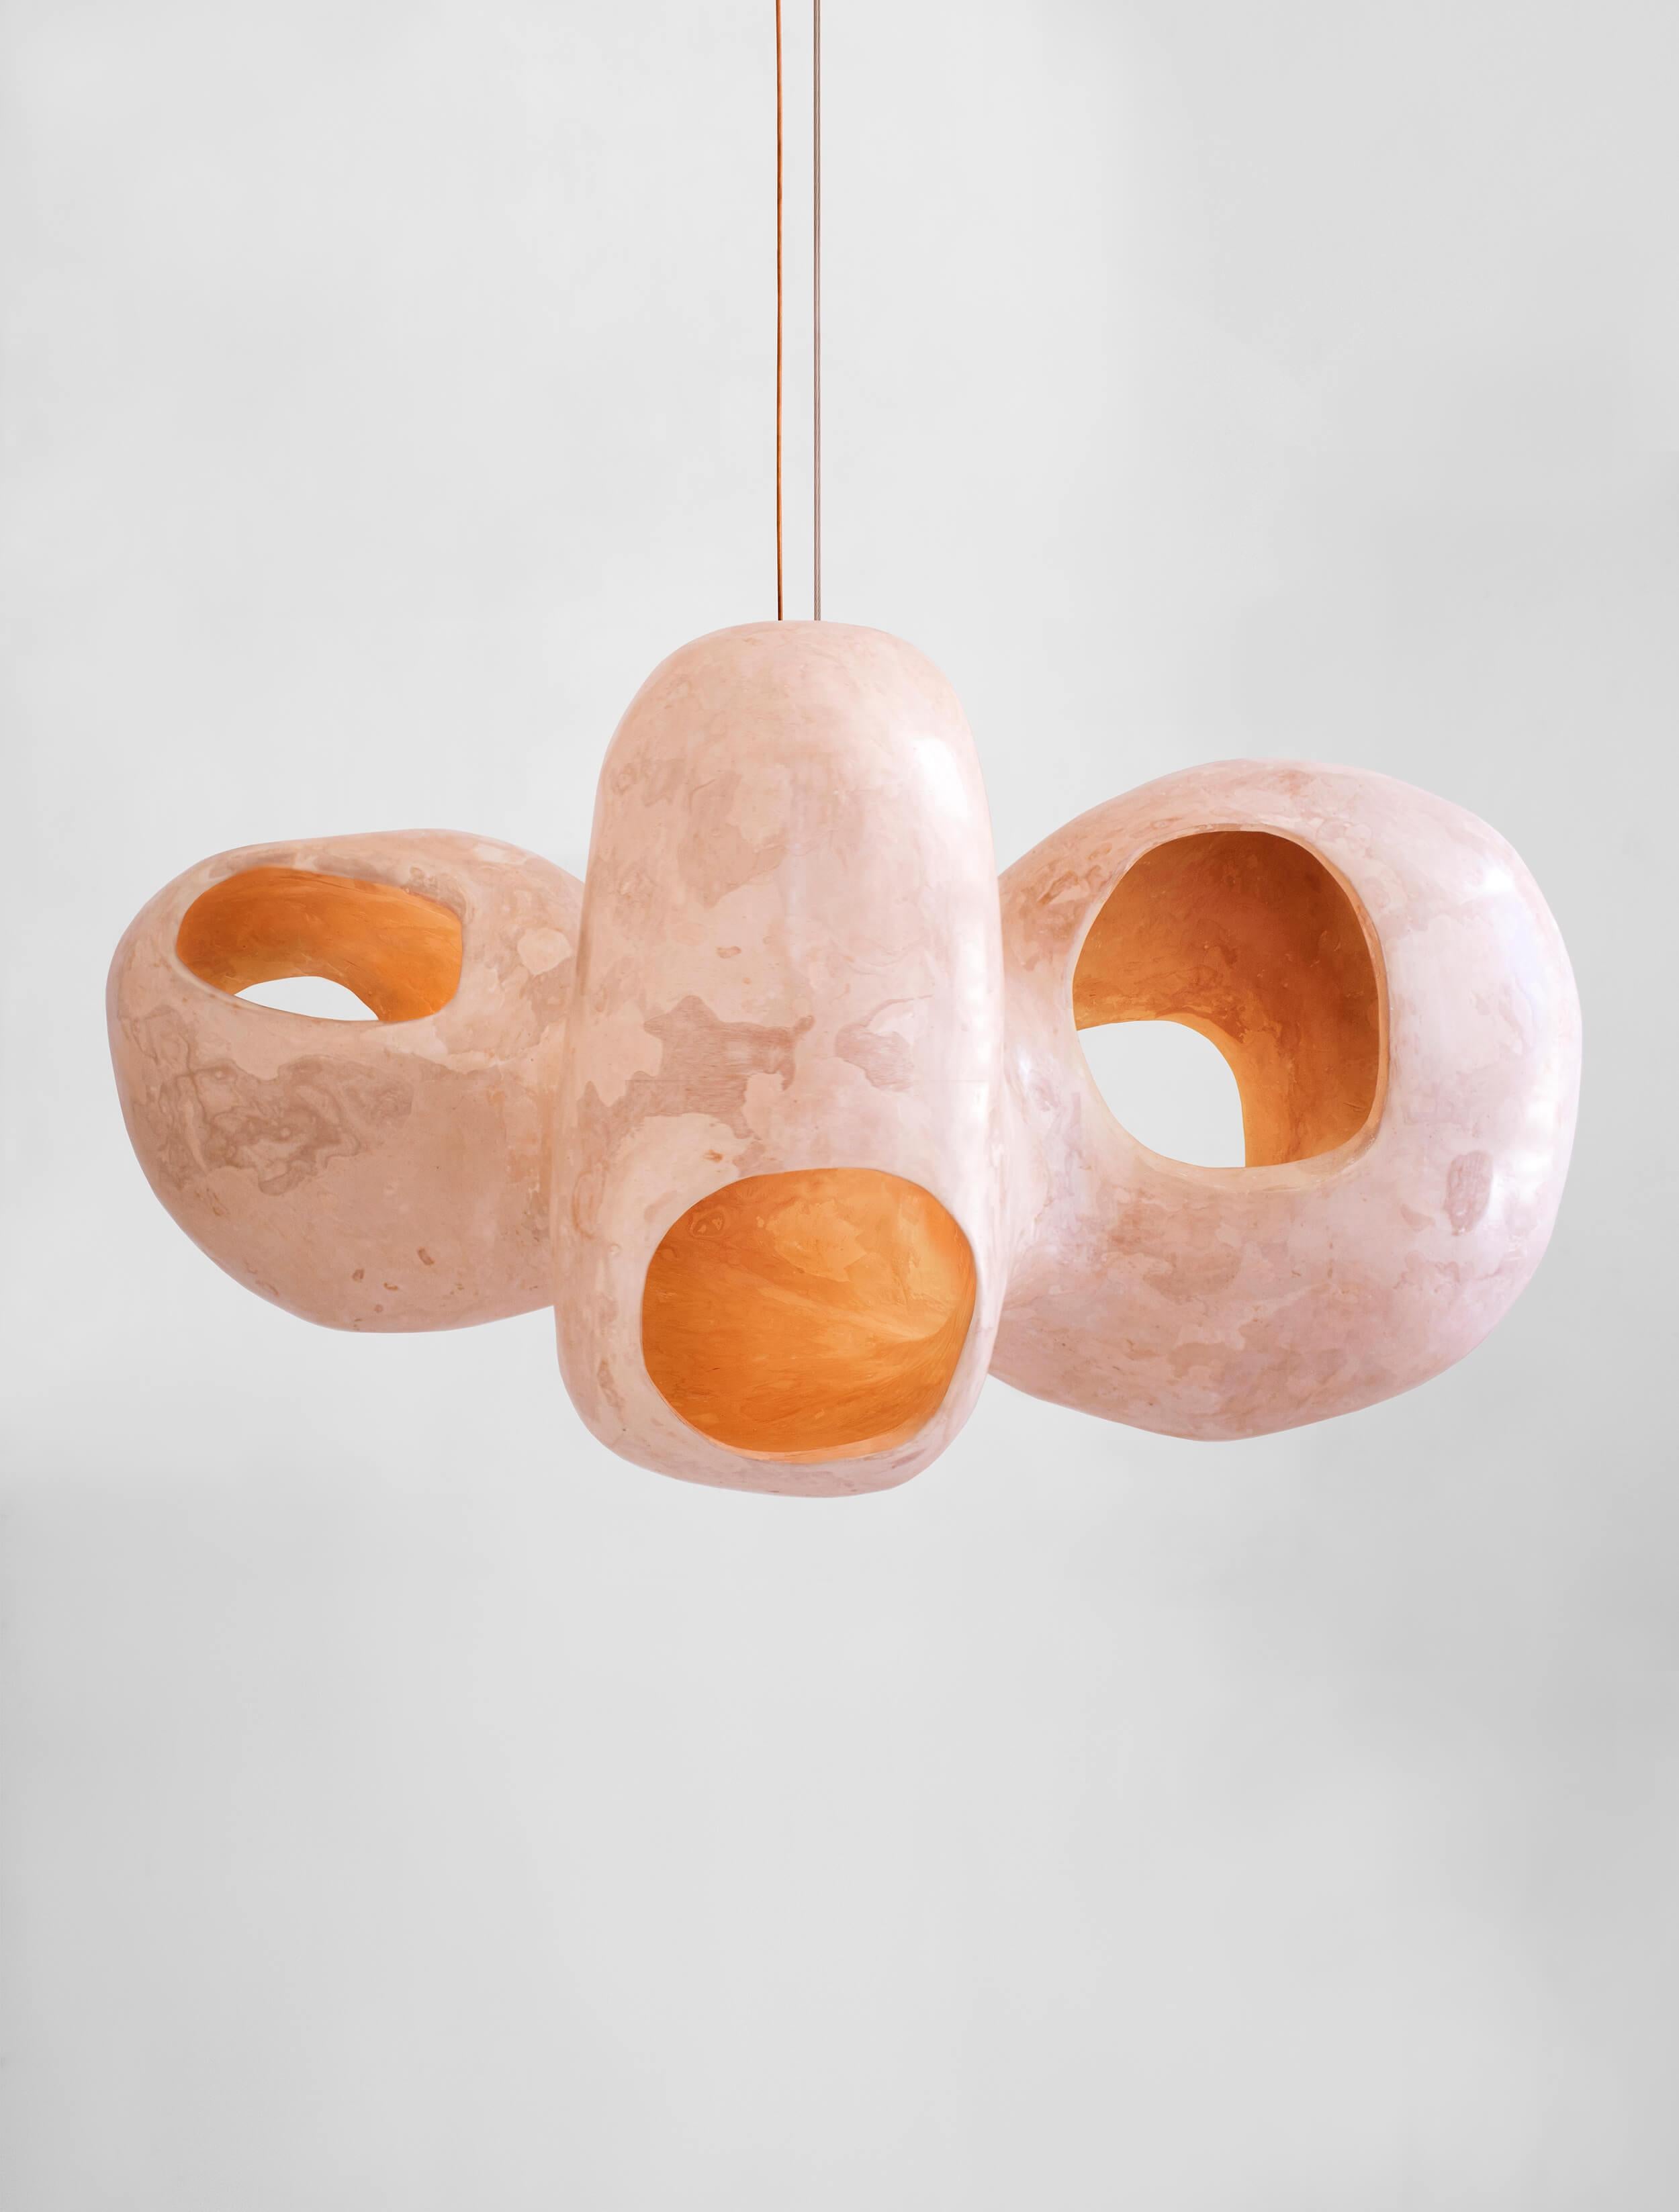 Bosei pendant lamp by AOAO
Dimensions: W 85 x D 85 x H 165 cm
Materials: Gypsum.
Color: pink beige.

The piece is hand-made in the Netherlands. Color options are available upon request. The size of the lamp can be customized.
The lamp contains